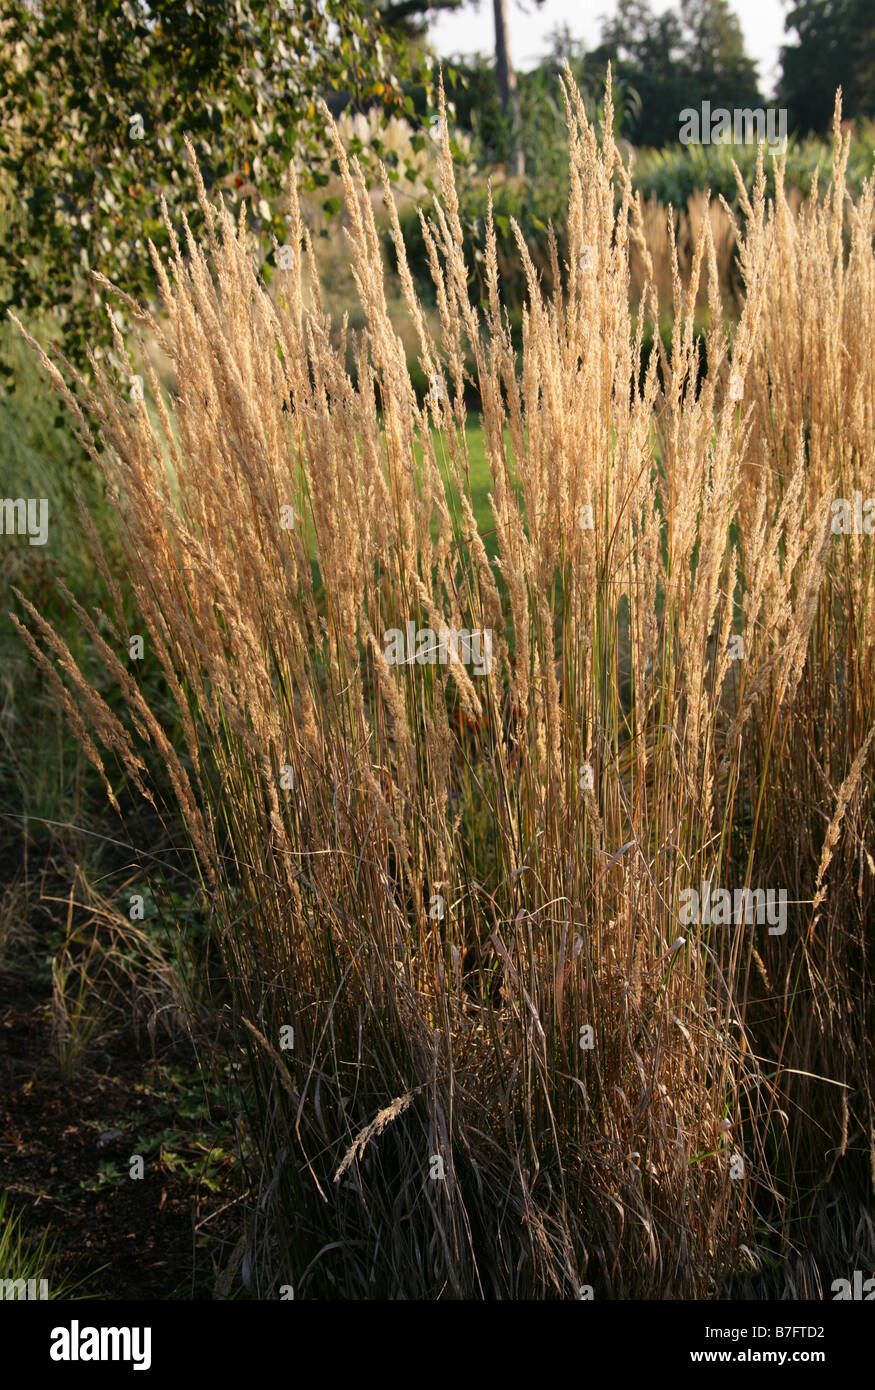 Small-reed or Reedgrass Calamagrostis x acutiflora Karl Foerster Poaceae. Aka Feather Reed Grass. Stock Photo